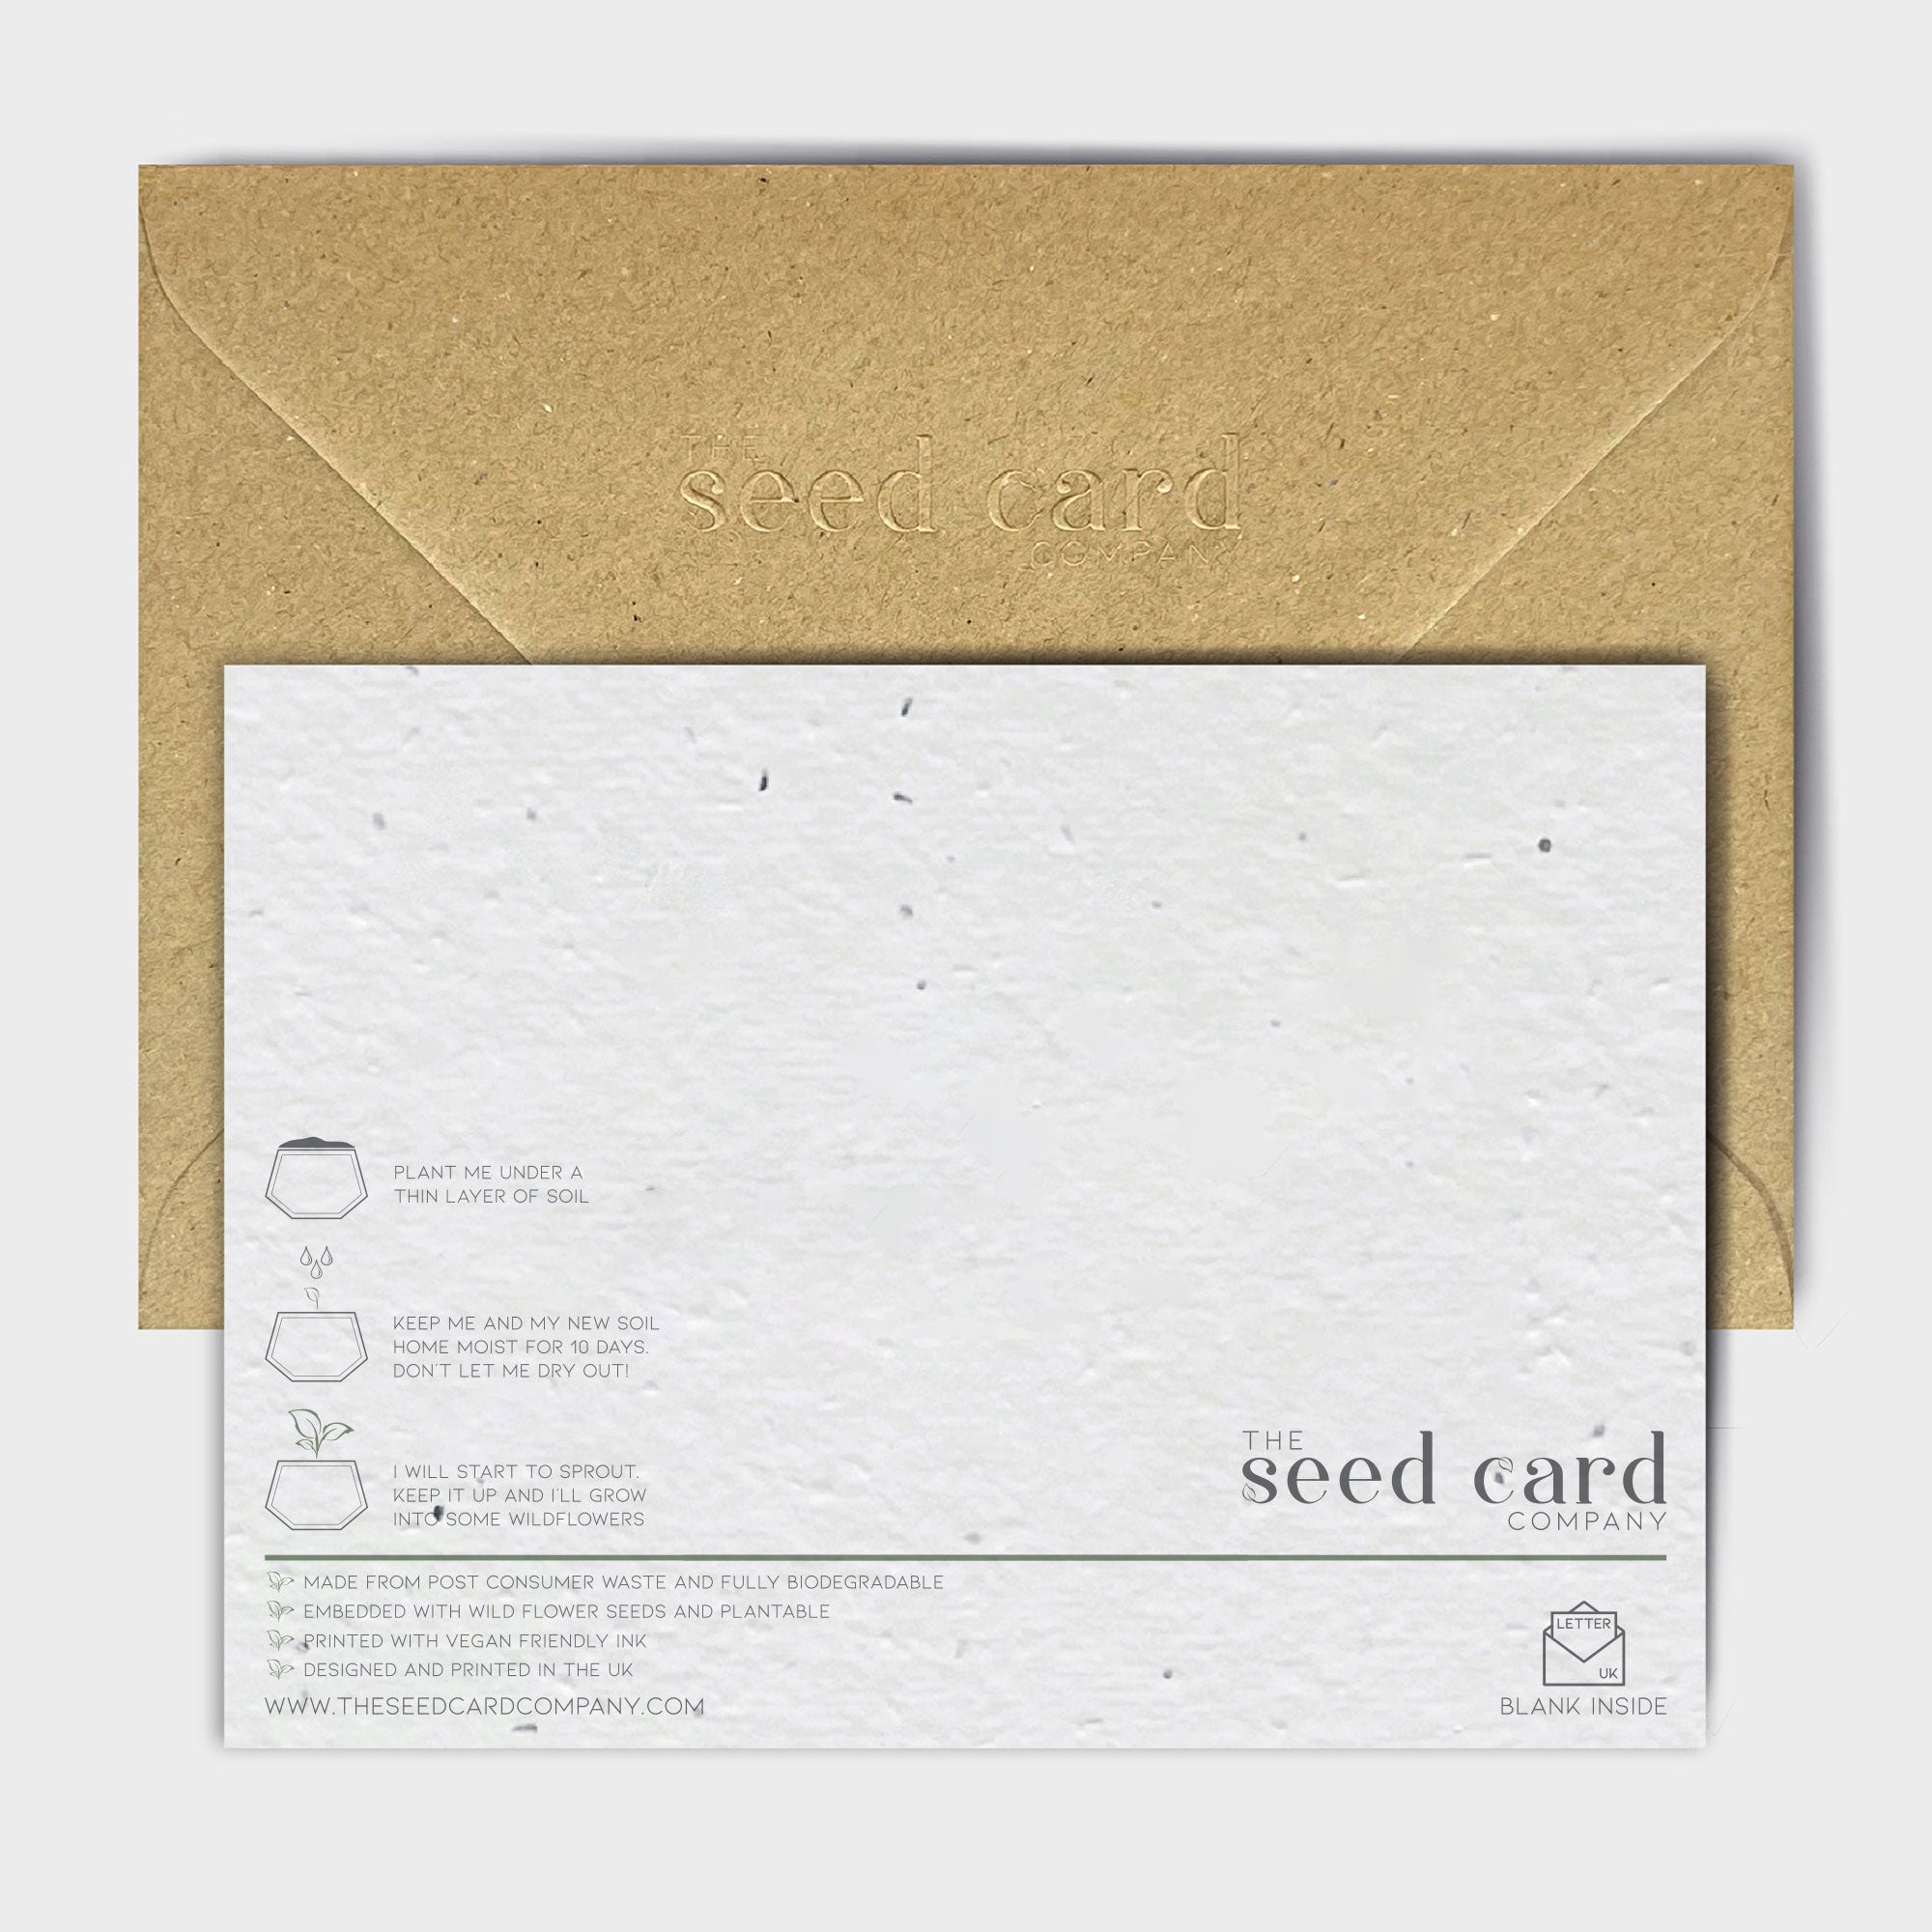 Shop online Escaso Gracias - 100% biodegradable seed-embedded cards Shop -The Seed Card Company